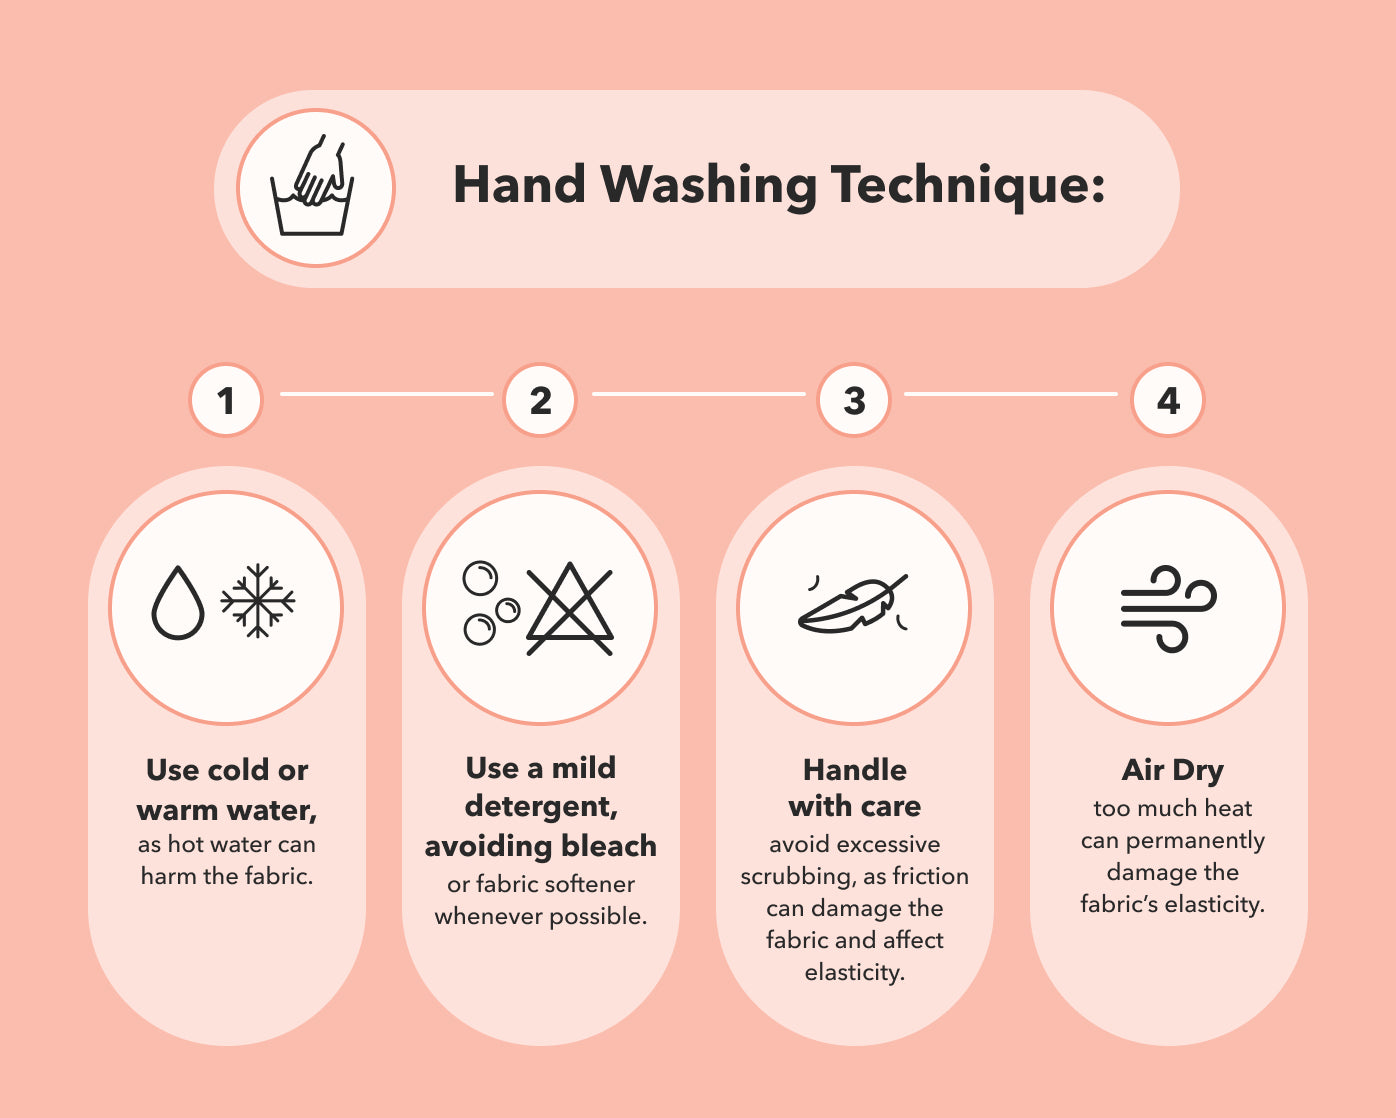 How To Wash And Care For Your Shapewear